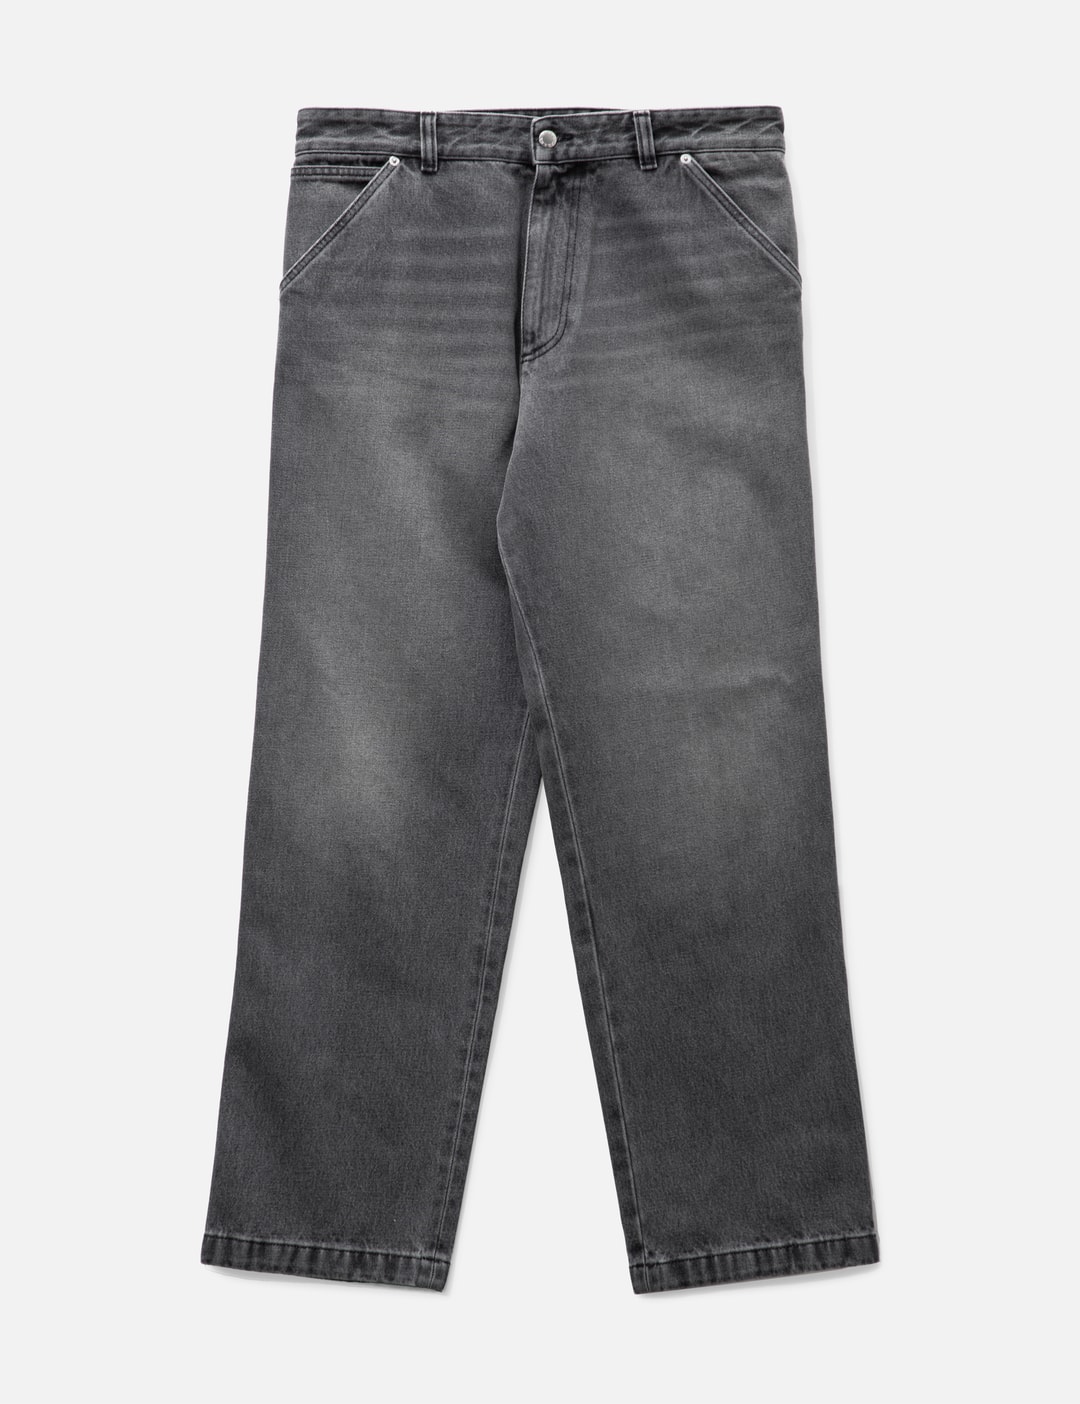 Prada - USED DENIM WIDE JEANS | HBX - Globally Curated Fashion and ...